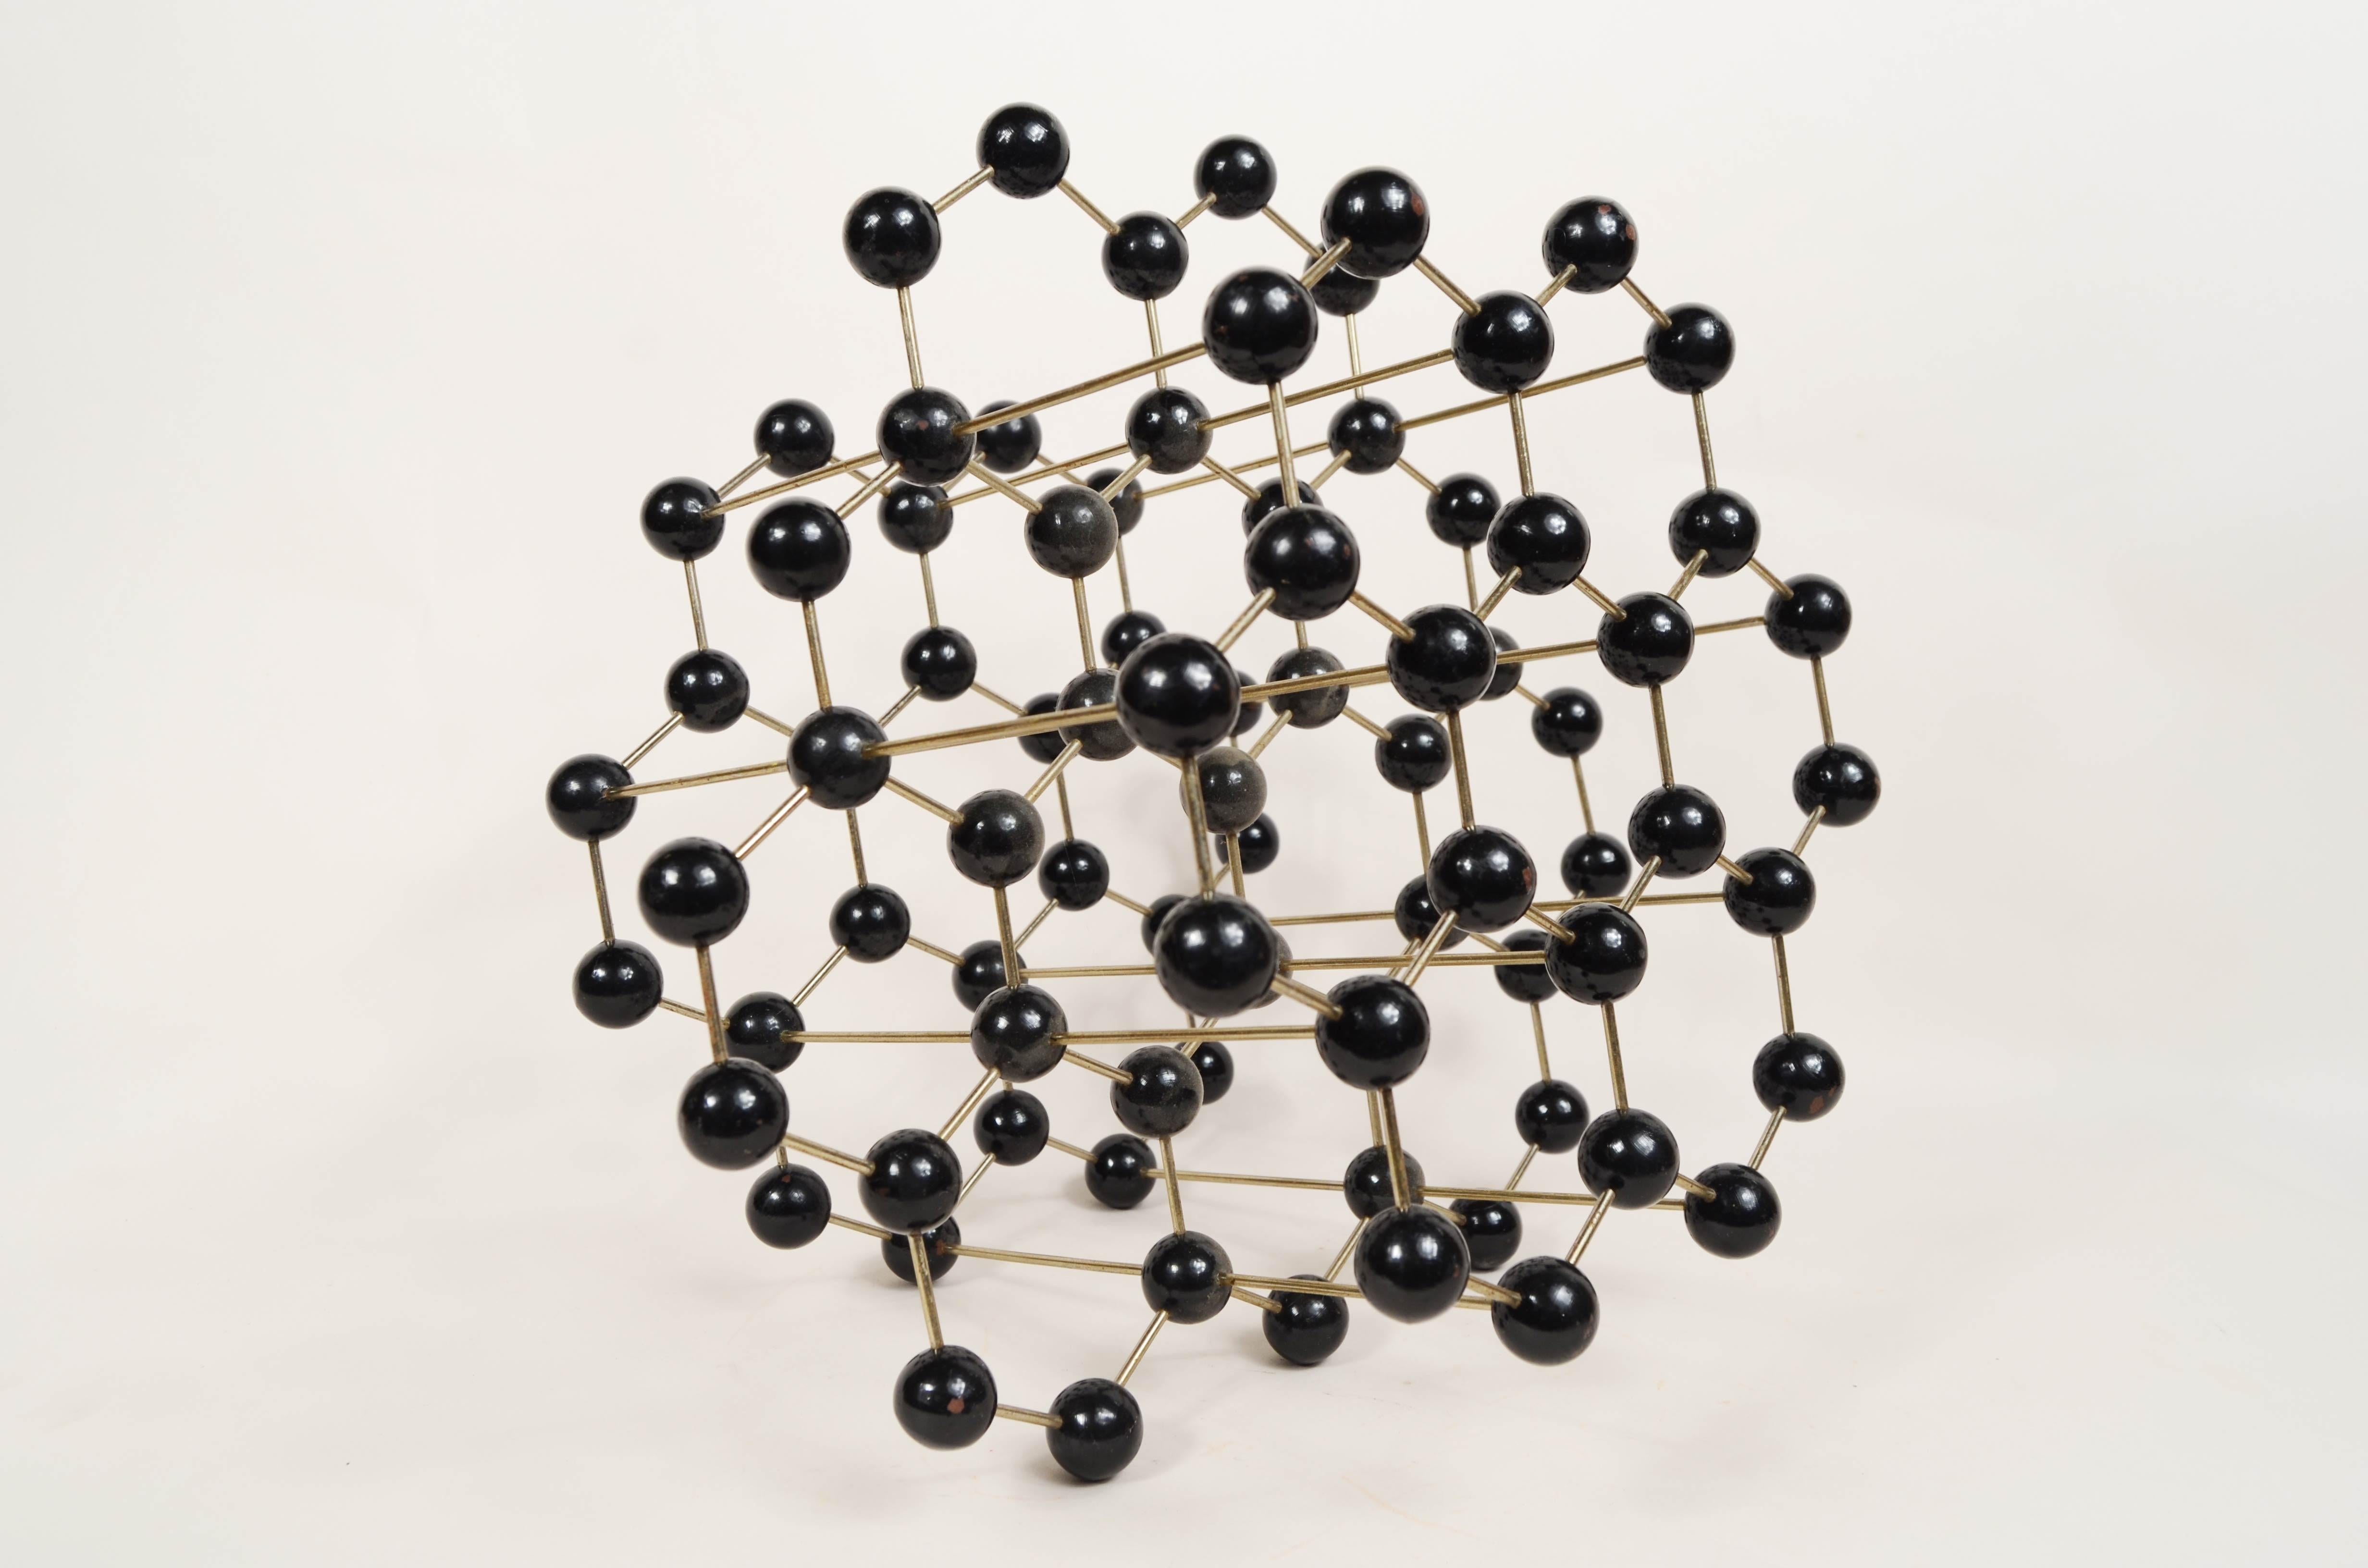 Atomic structure for educational use of graphite made  metal with black Bakelite spheres. Czechoslovakian manufacture of the 1950s. 
Good  condition, Measures 28x28x20 cm - inches 11x11x7.9. 
Graphite is a mineral that represents one of the states